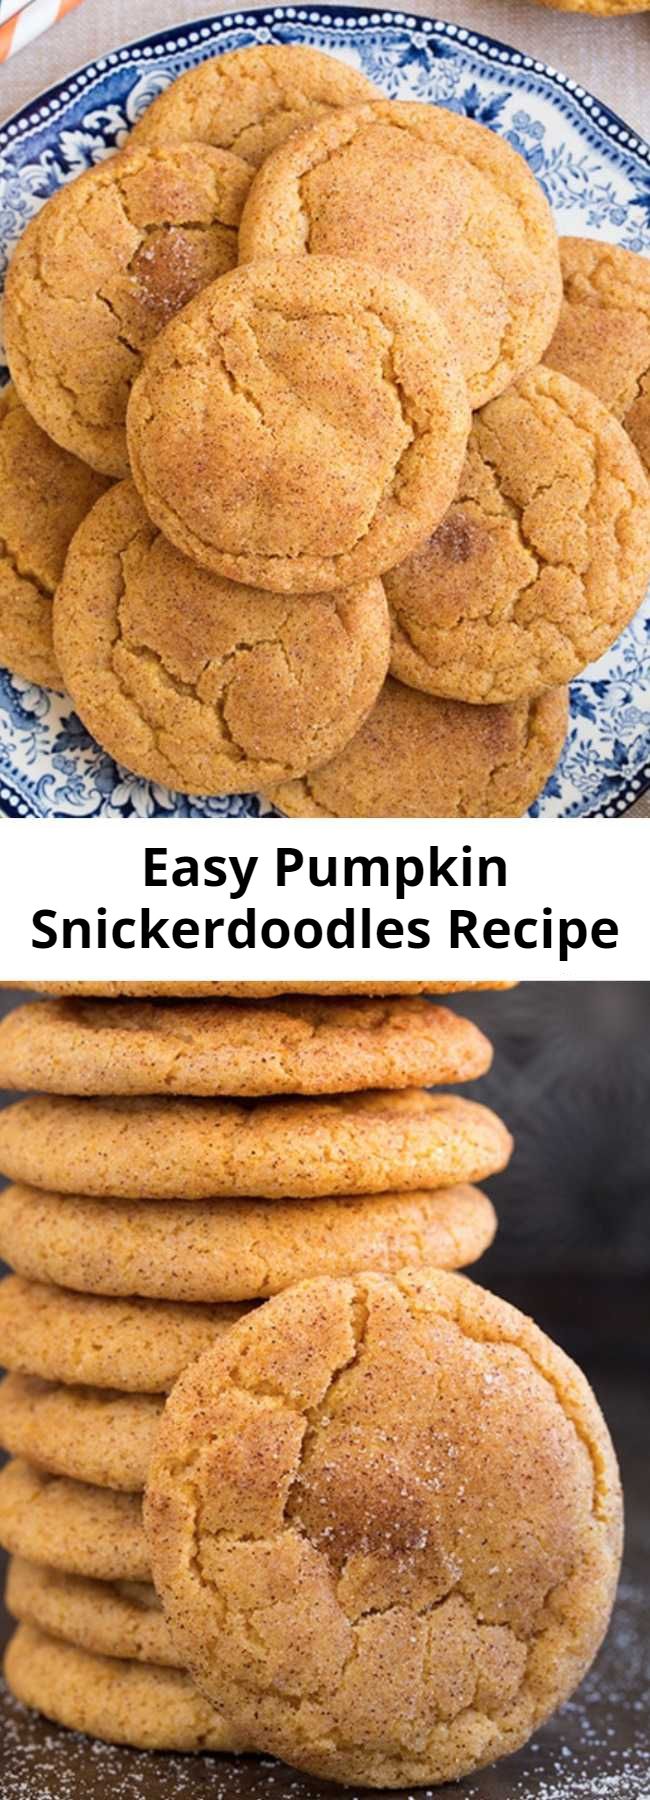 Easy Pumpkin Snickerdoodles Recipe - Easy and Irresistible pumpkin Snickerdoodles. Two of the worlds best cookies in one! Soft and tender and deliciously flavorful!